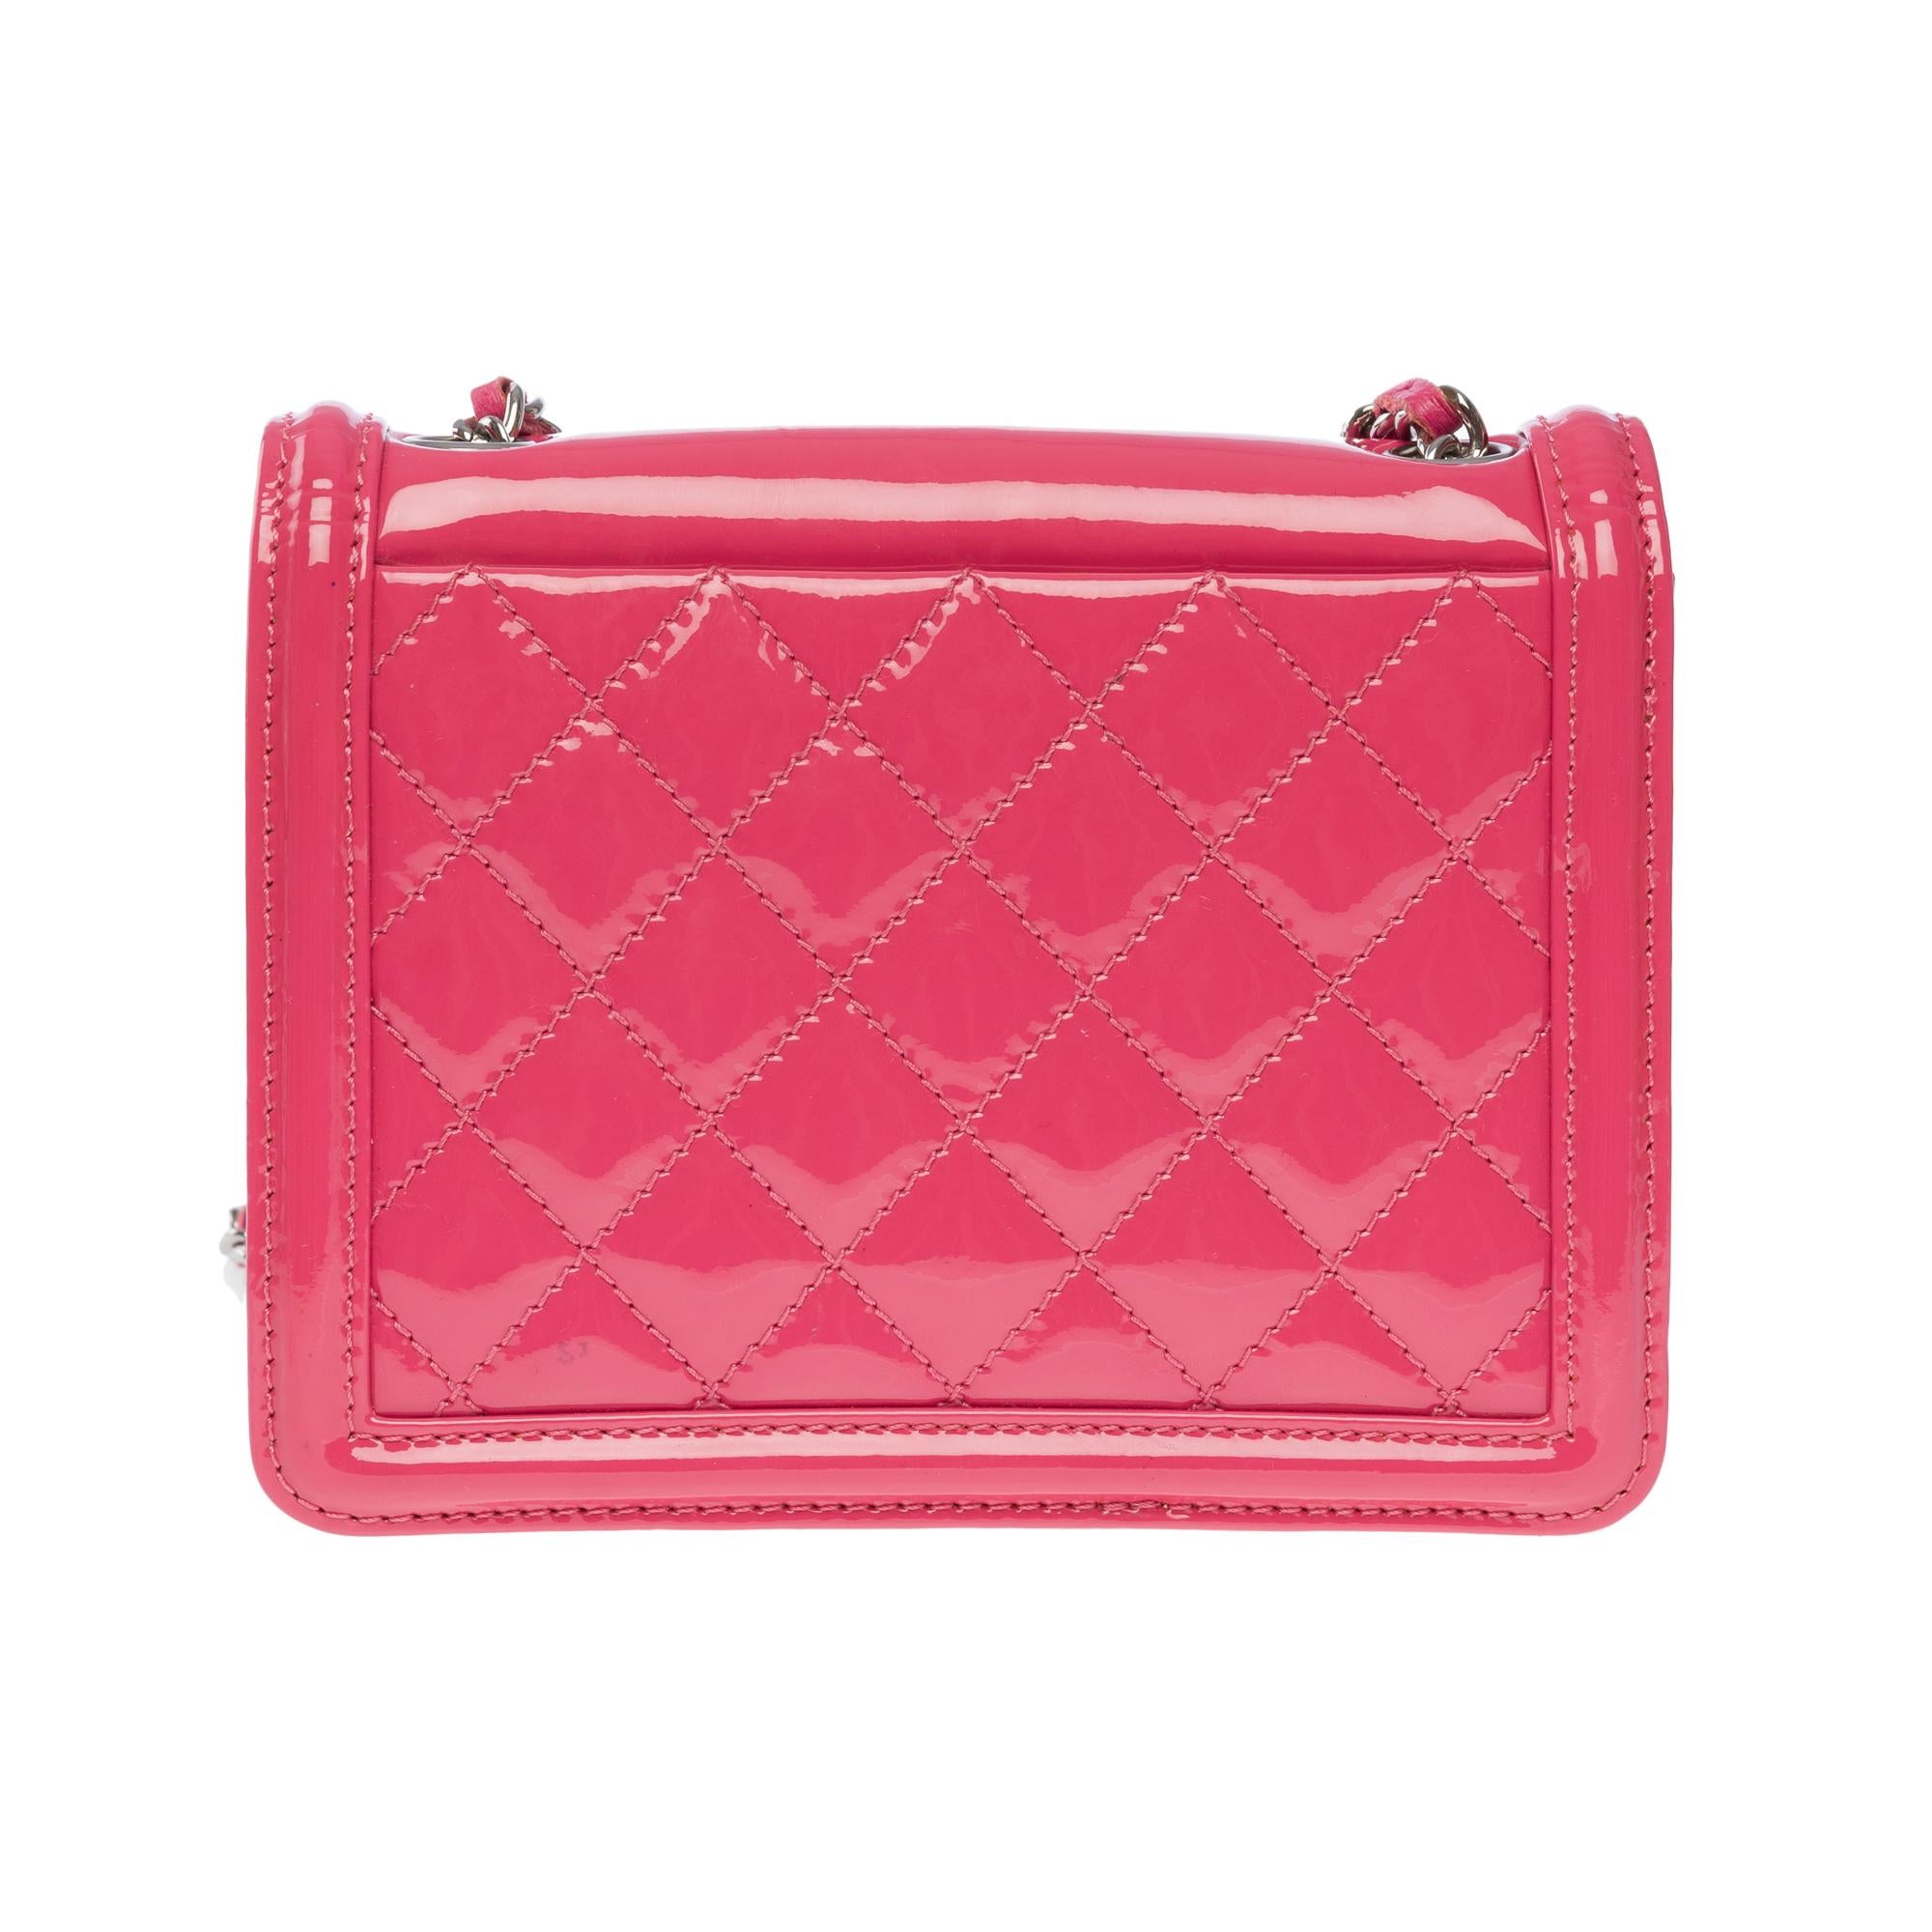 Exceptional & Rare limited edition from the fashion shows S/ S 2014 Chanel Mini shoulder flap bag brick lego neon pink and orange bright pink quilted patent leather with plexiglas plates on the front, Silver-tone metal shoulder strap interlaced with